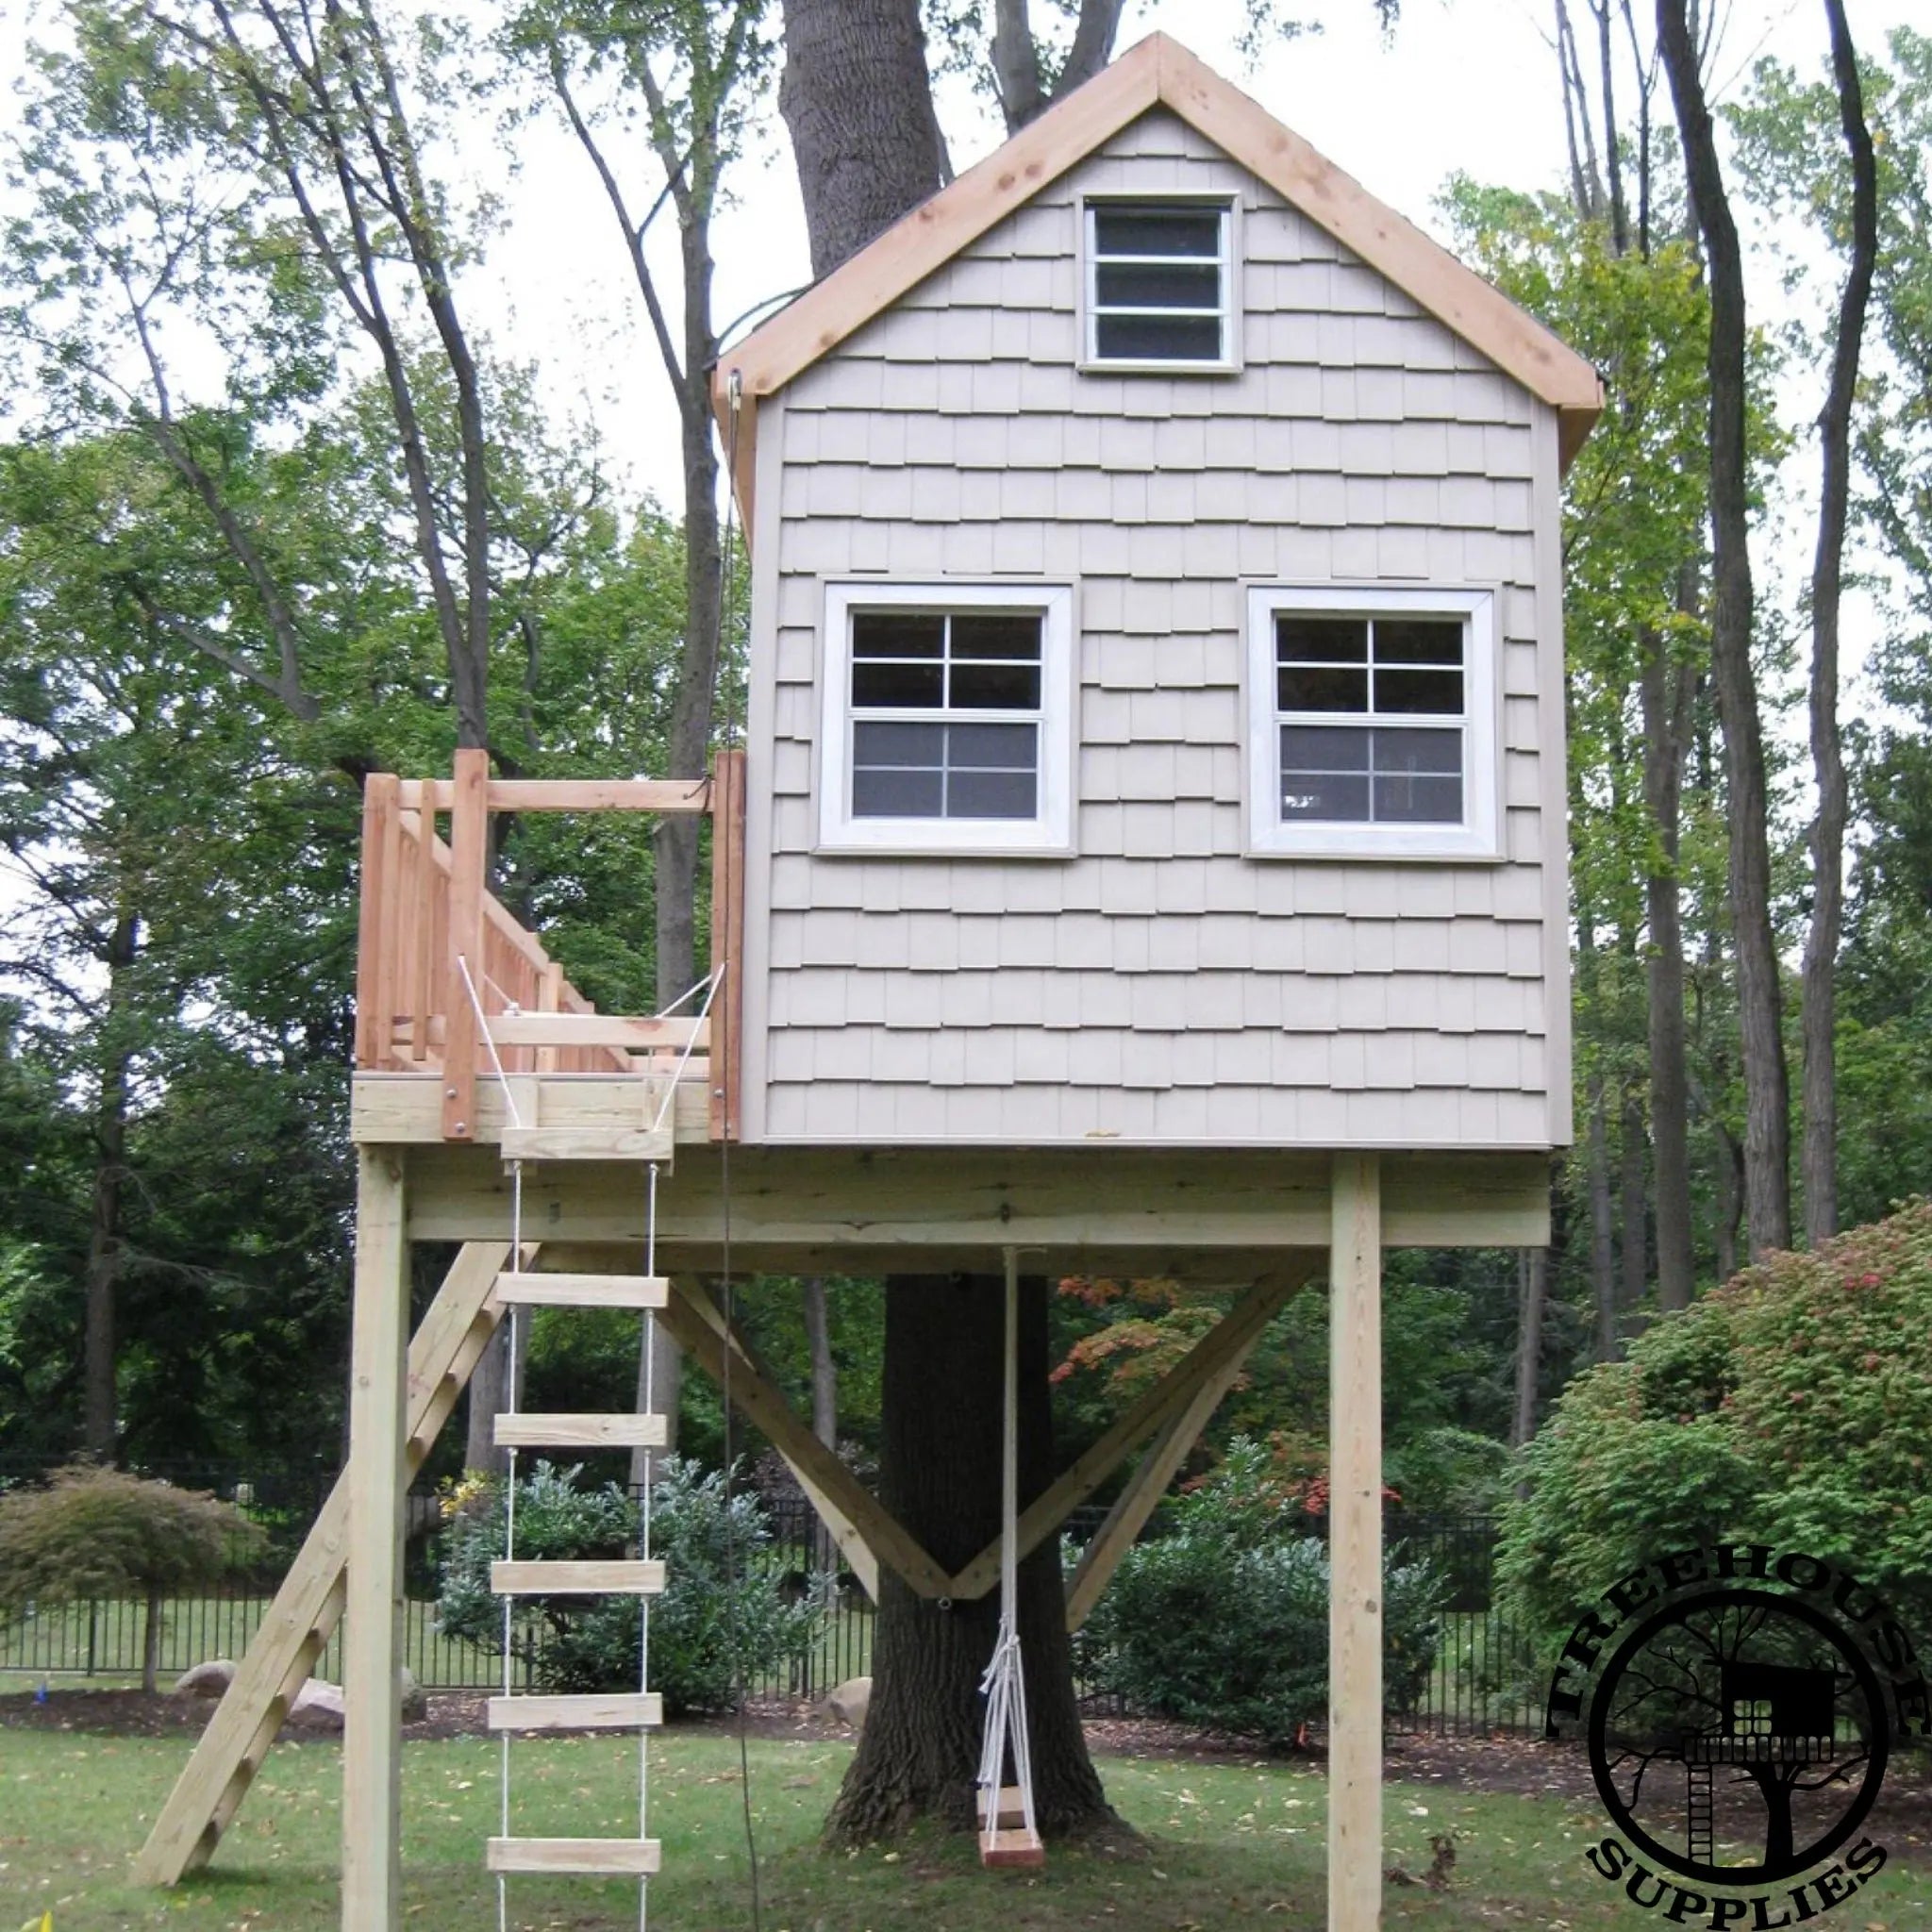 White treehouse 12 foot by 14 foot with rectangular design and a One tree two post layout. Treehouse with deck, white siding, three windows, rope ladder, brown railing and tan roof. Treehouse plans for sale.